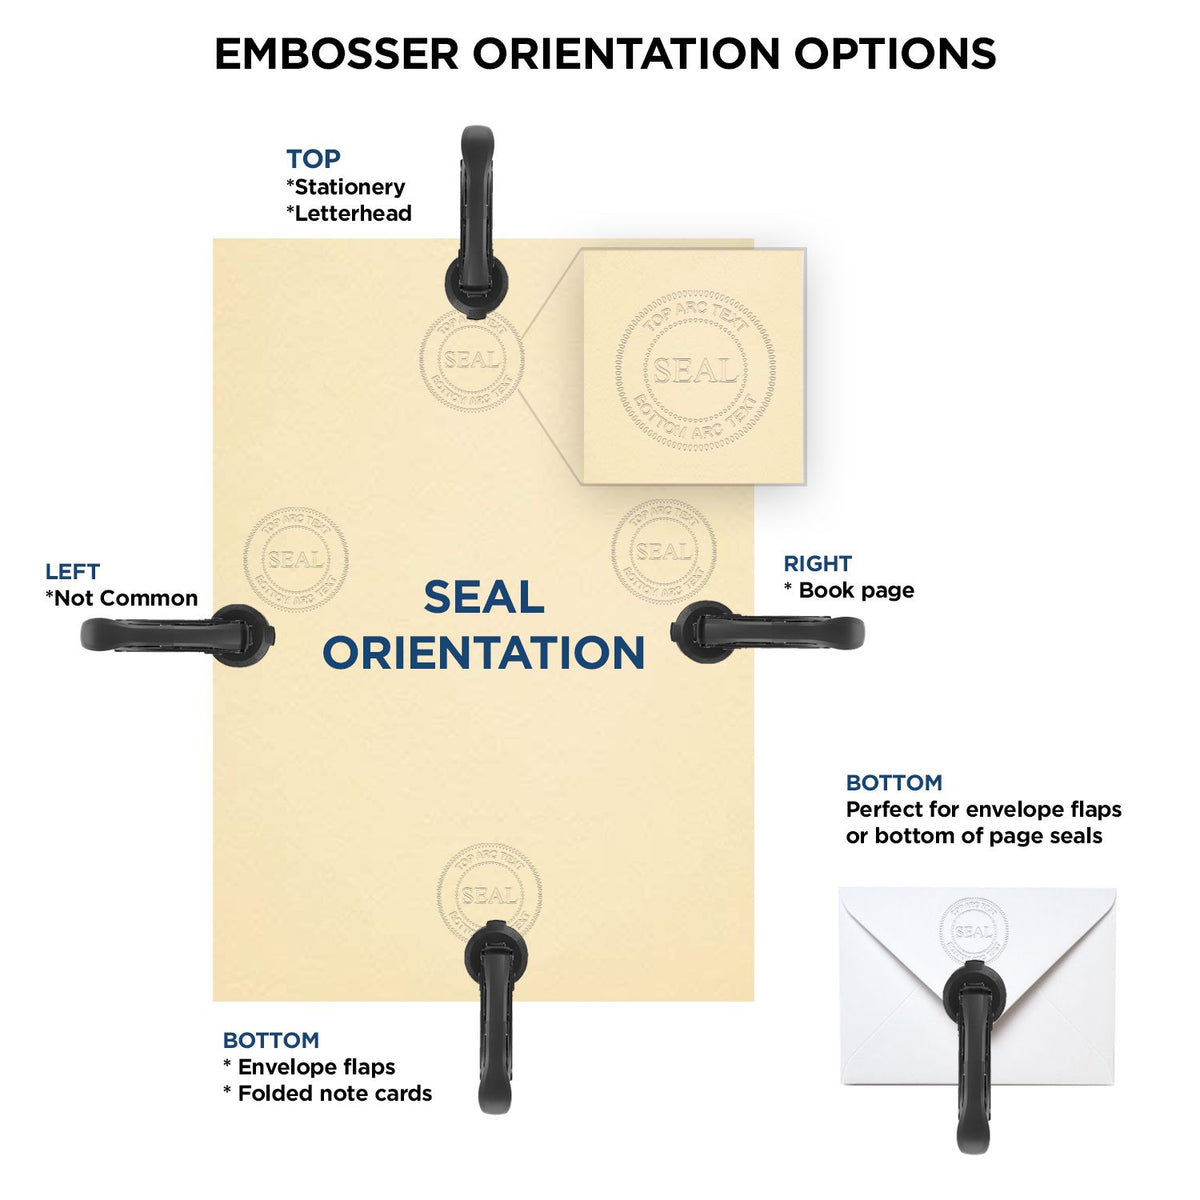 An infographic for the Heavy Duty Cast Iron Florida Engineer Seal Embosser showing embosser orientation, this is showing examples of a top, bottom, right and left insert.